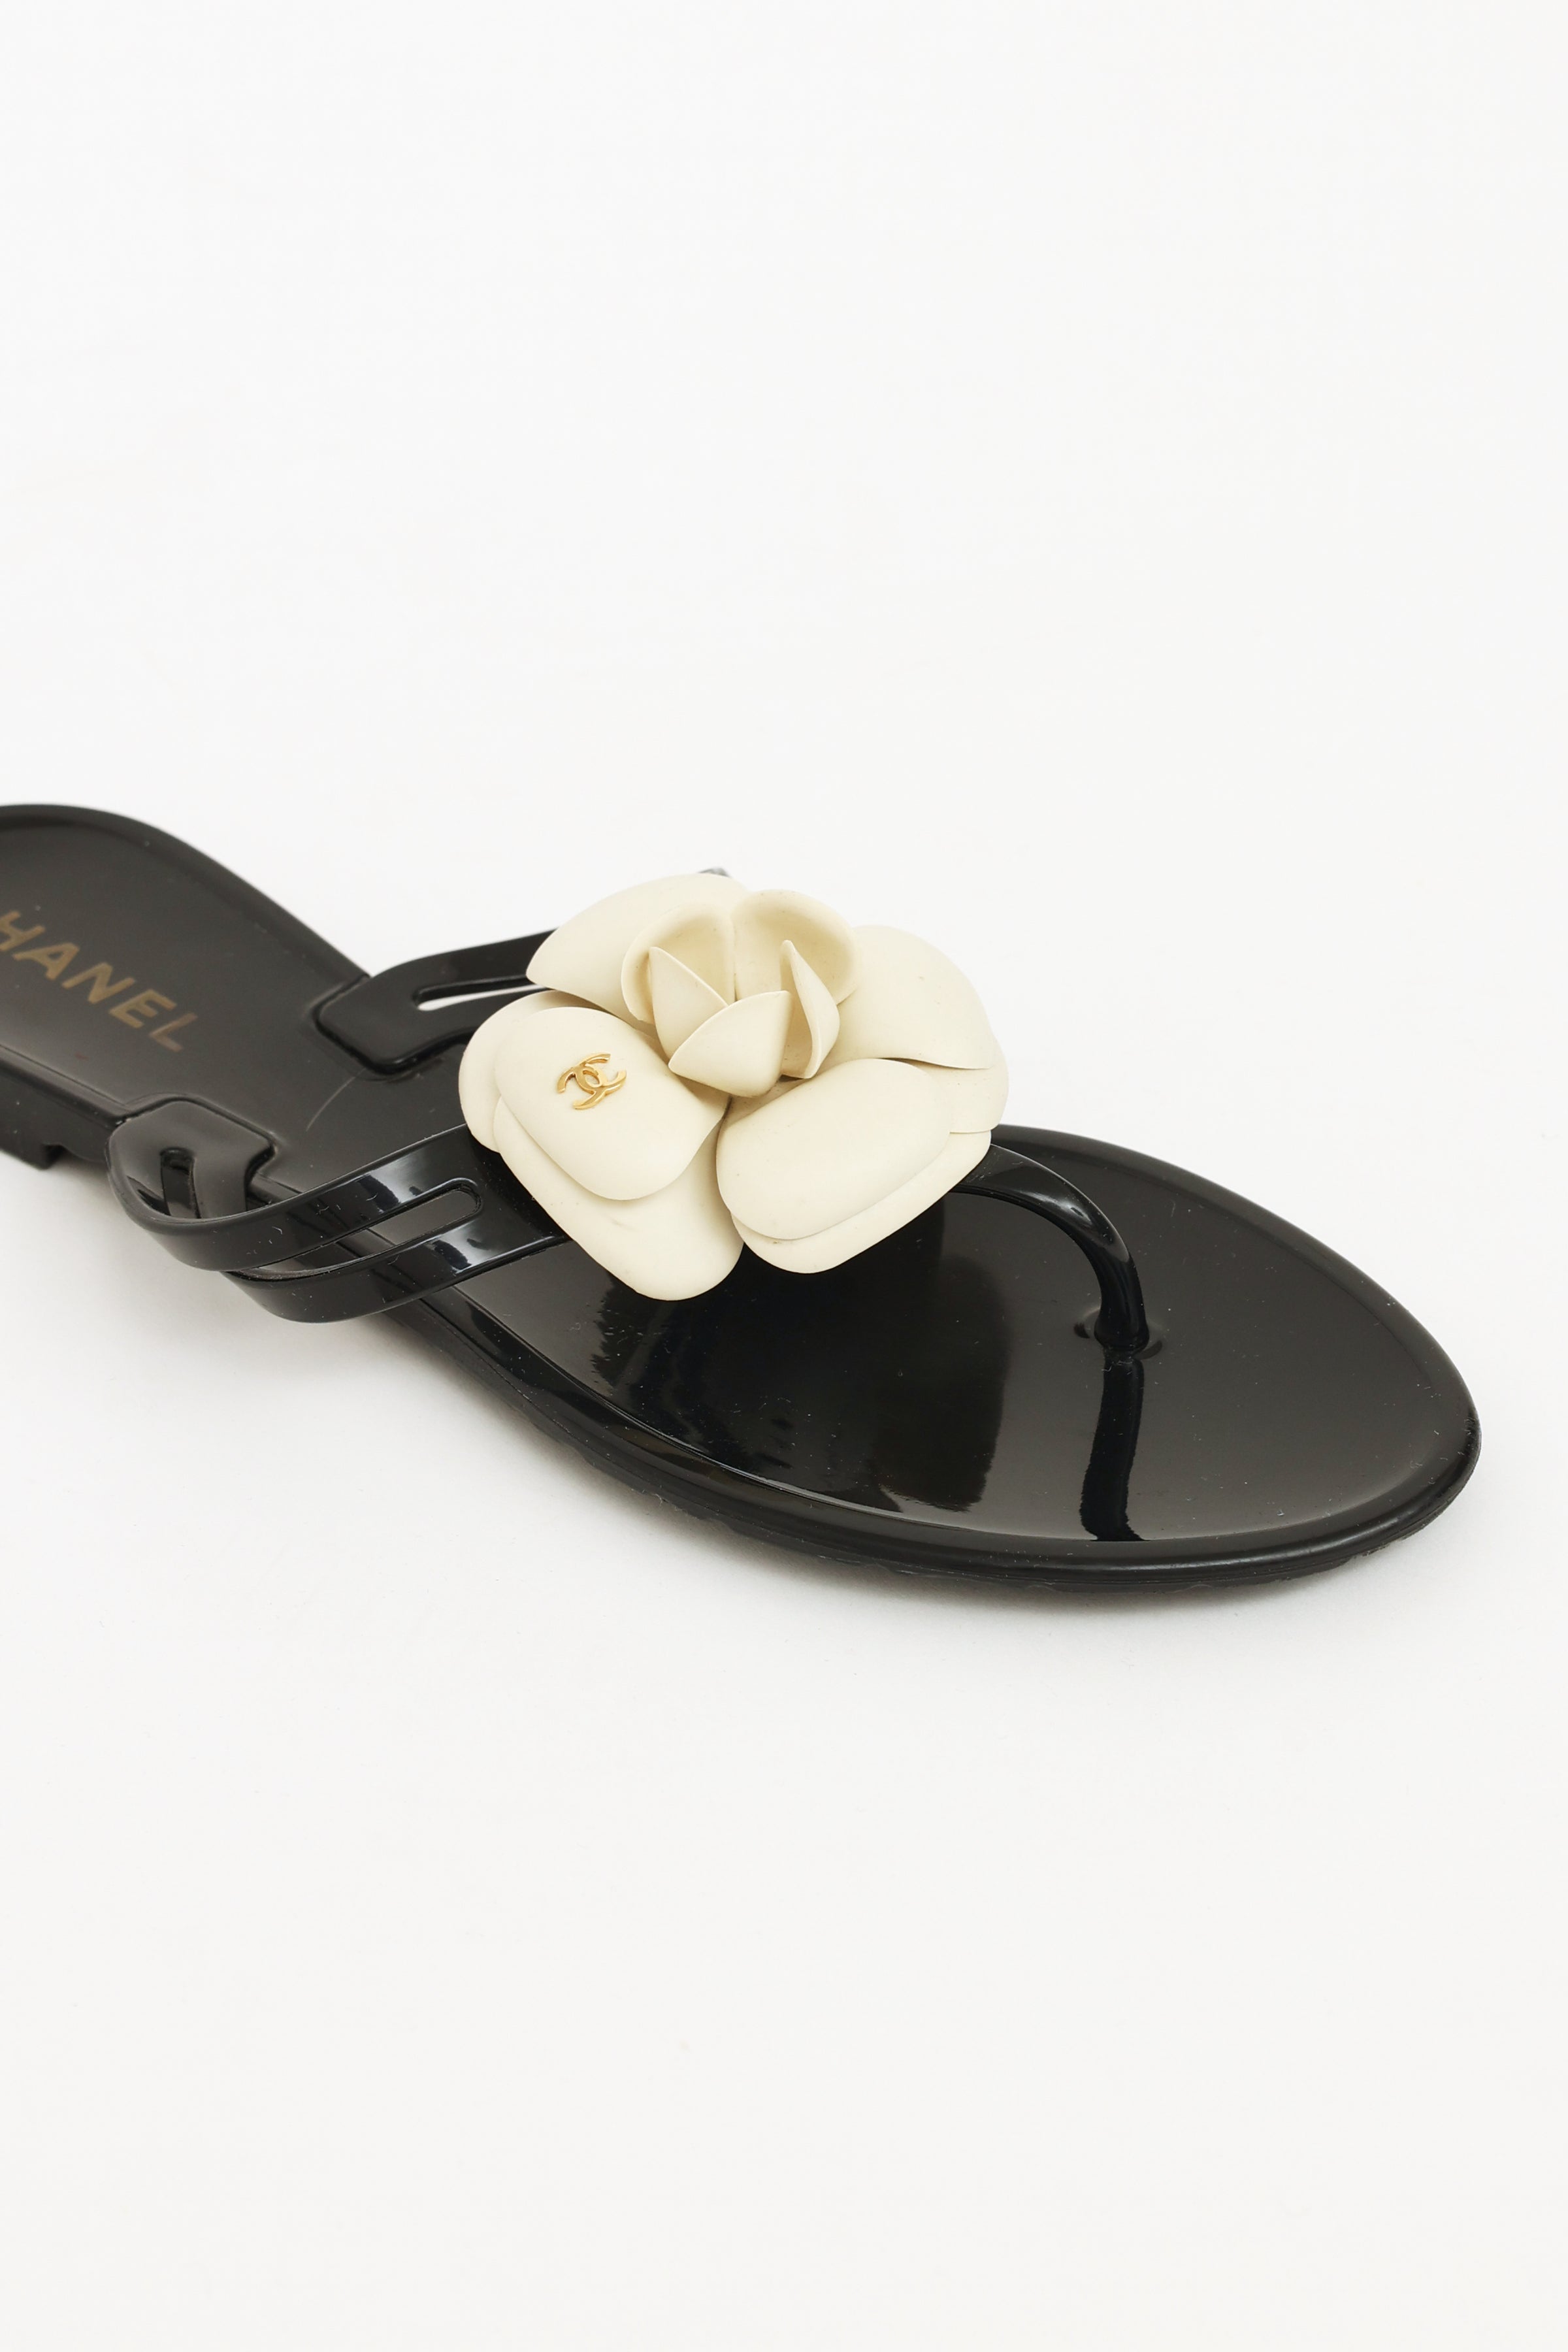 CHANEL, Shoes, Chanel Camellia Flower Jelly Sandals